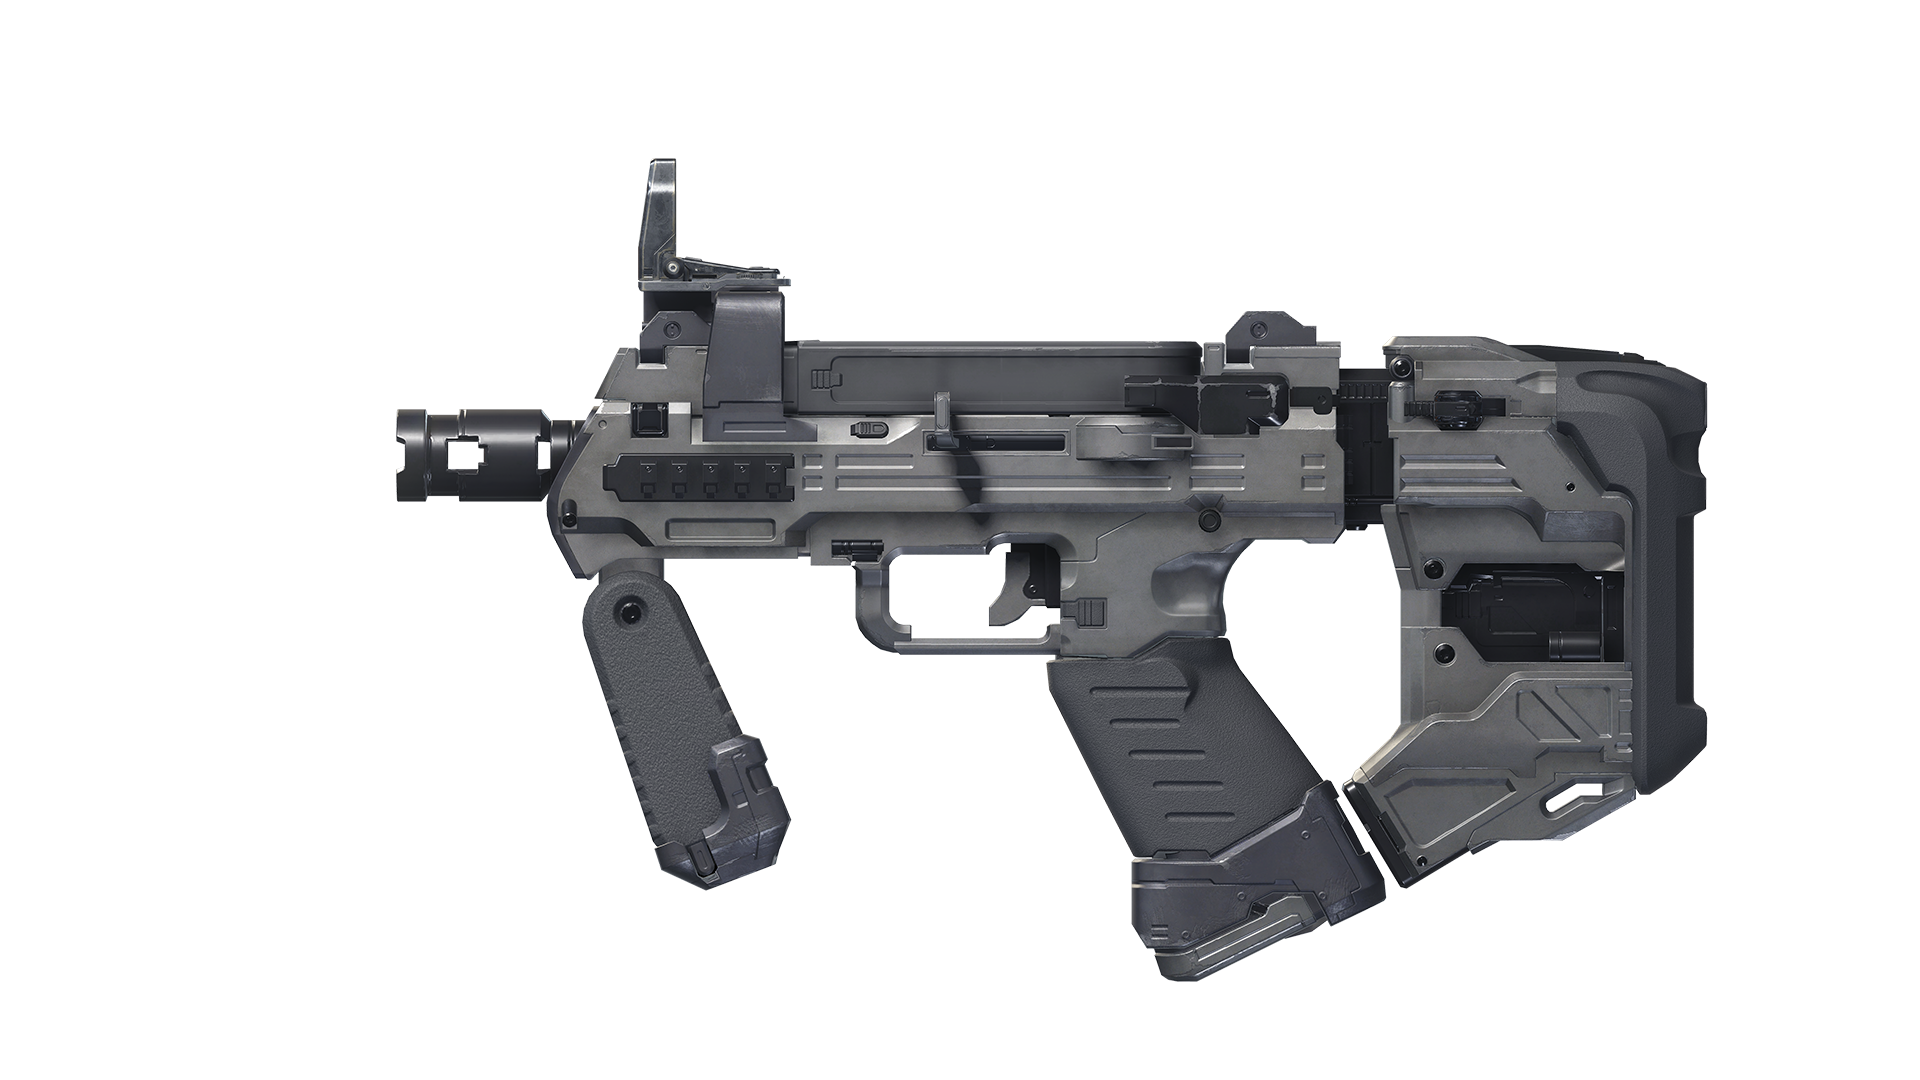 H5G render SMG.png